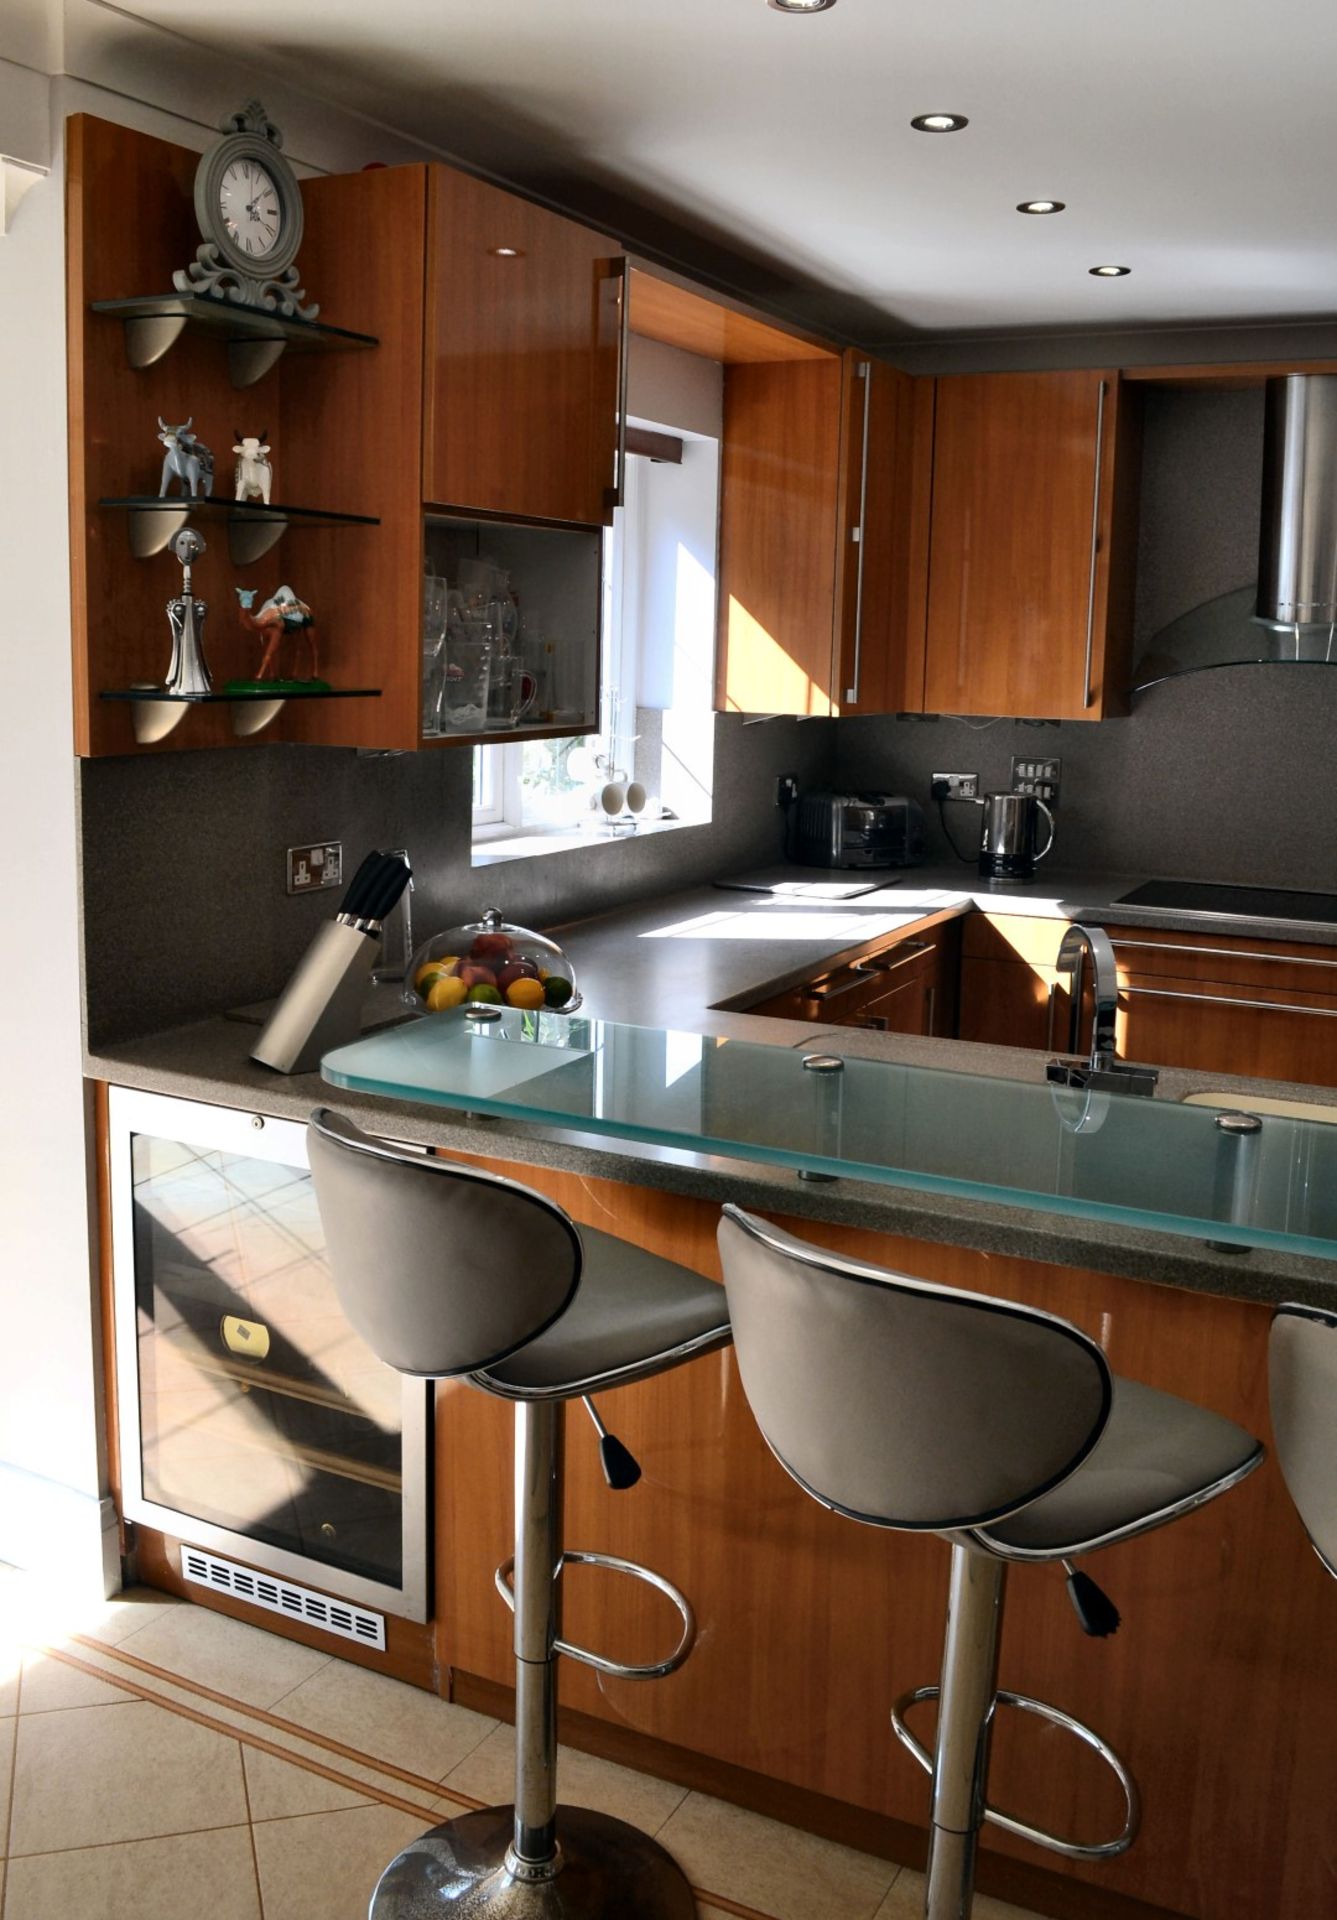 1 x Bespoke Siematic Gloss Fitted Kitchen With Corian Worktops, Frosted Glass Breakfast Bar - NO VAT - Image 9 of 91